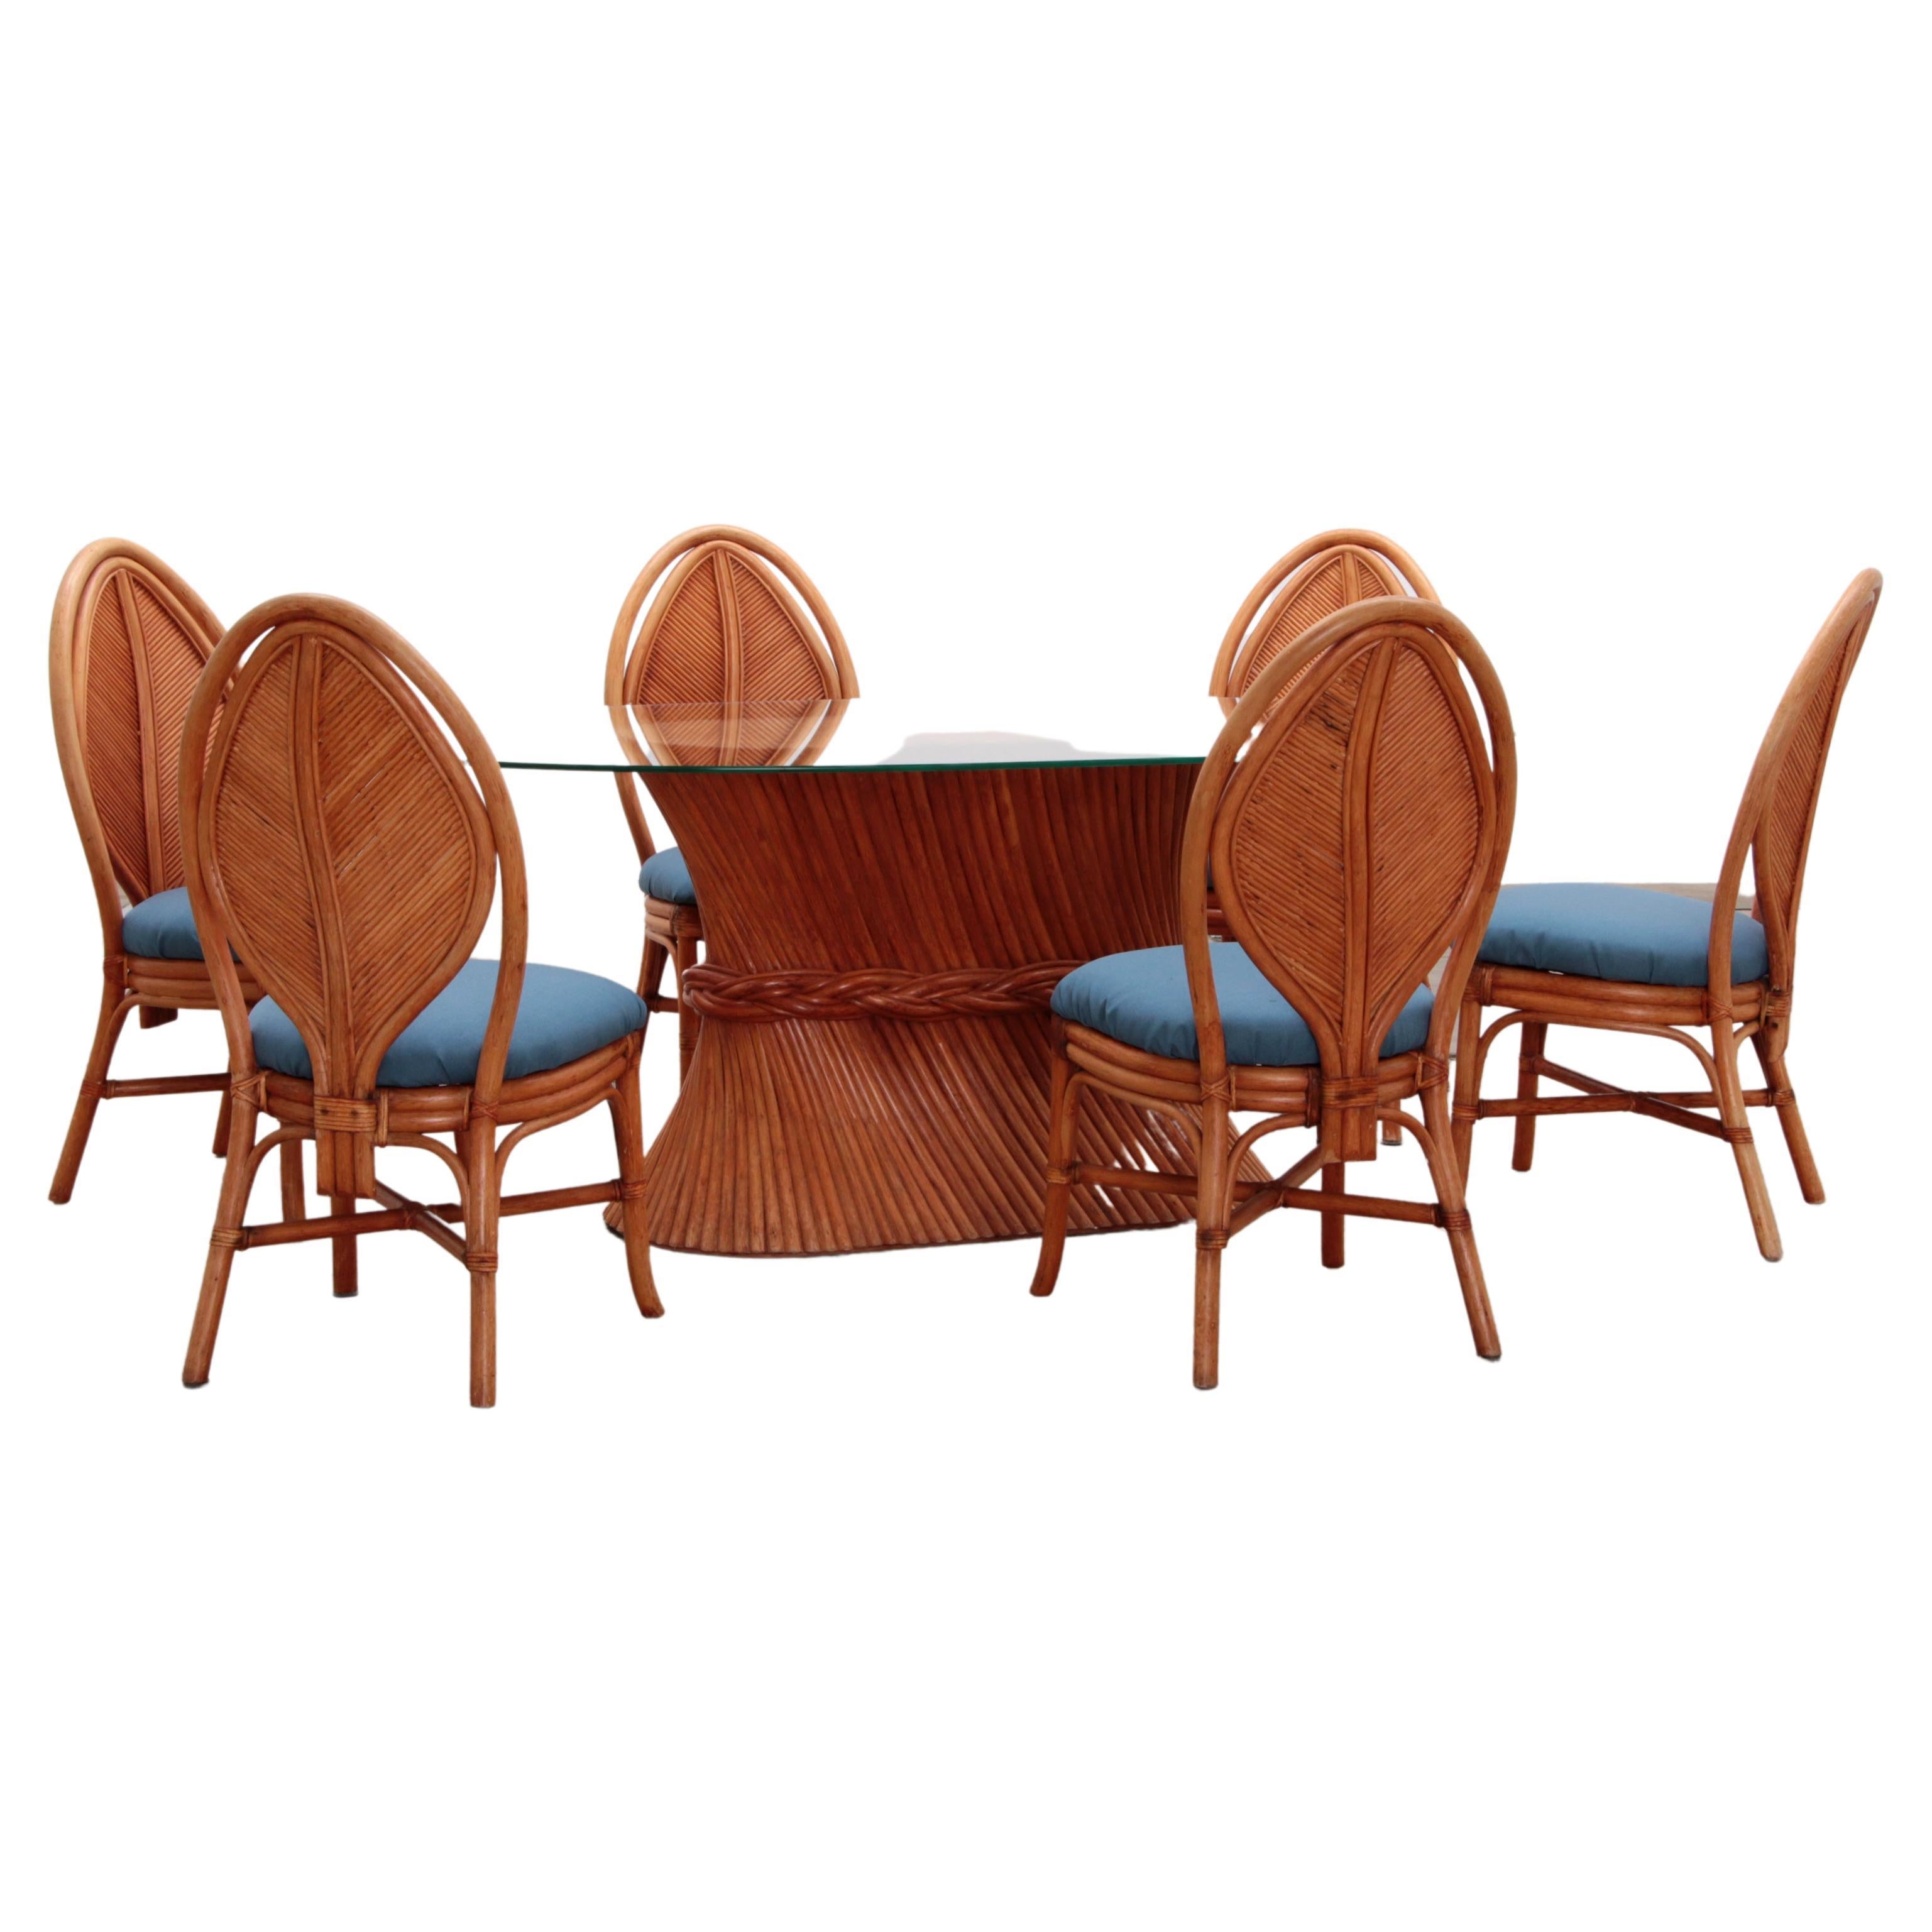 Bohemian Bamboo Mcguire dining table set with 6 palm leaf chairs, 1960 France.